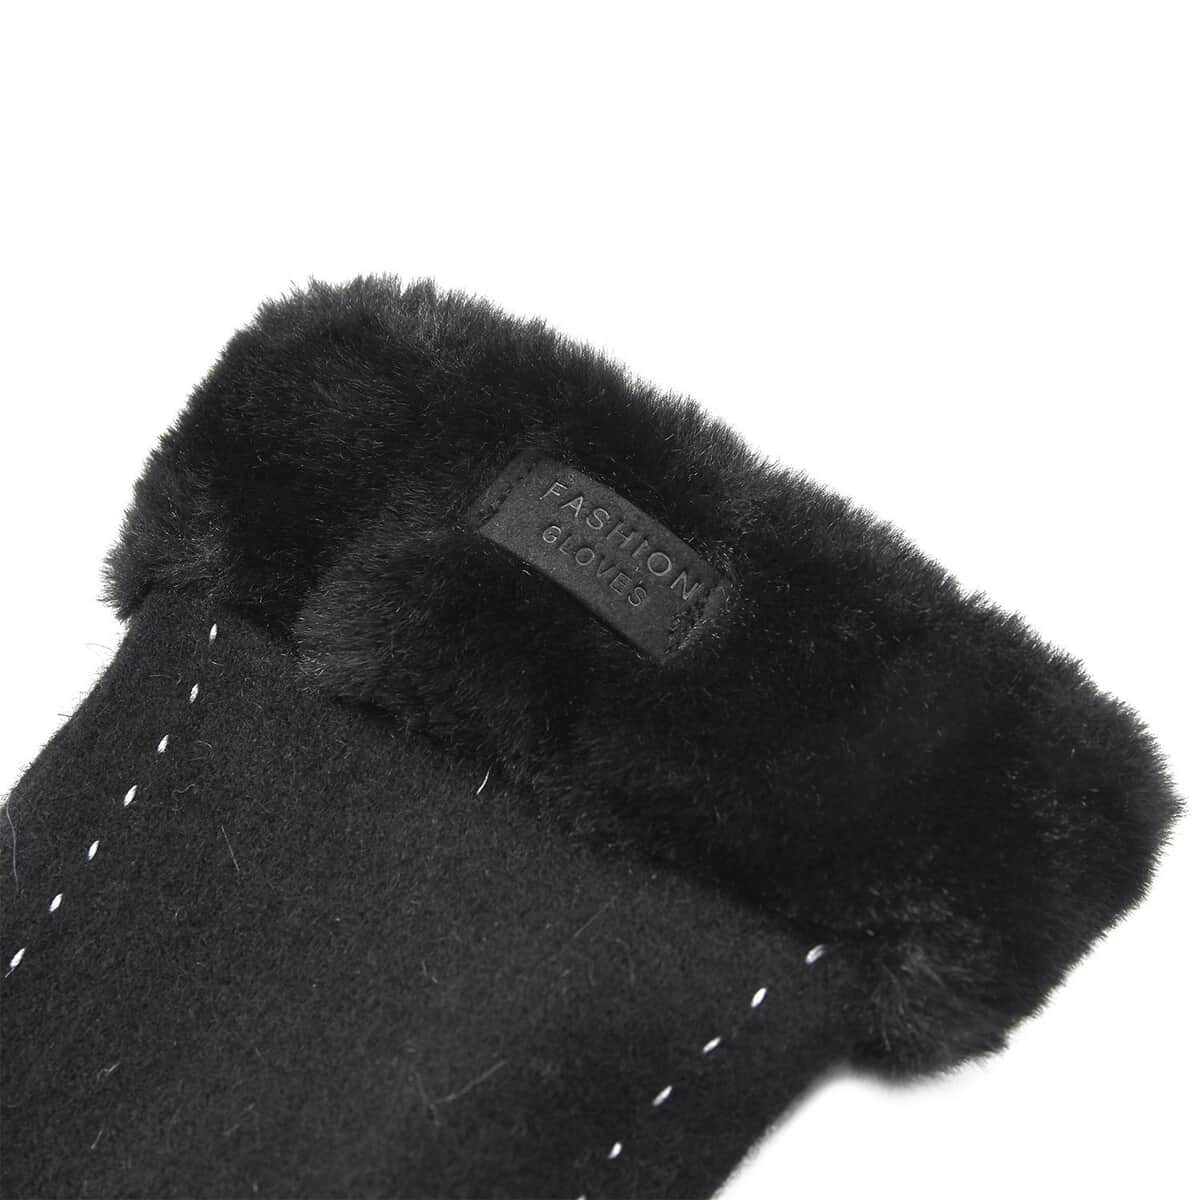 Ankur Treasure Chest Black Cashmere Warm Gloves with Faux Fur and Equipped Touch Screen Friendly image number 5